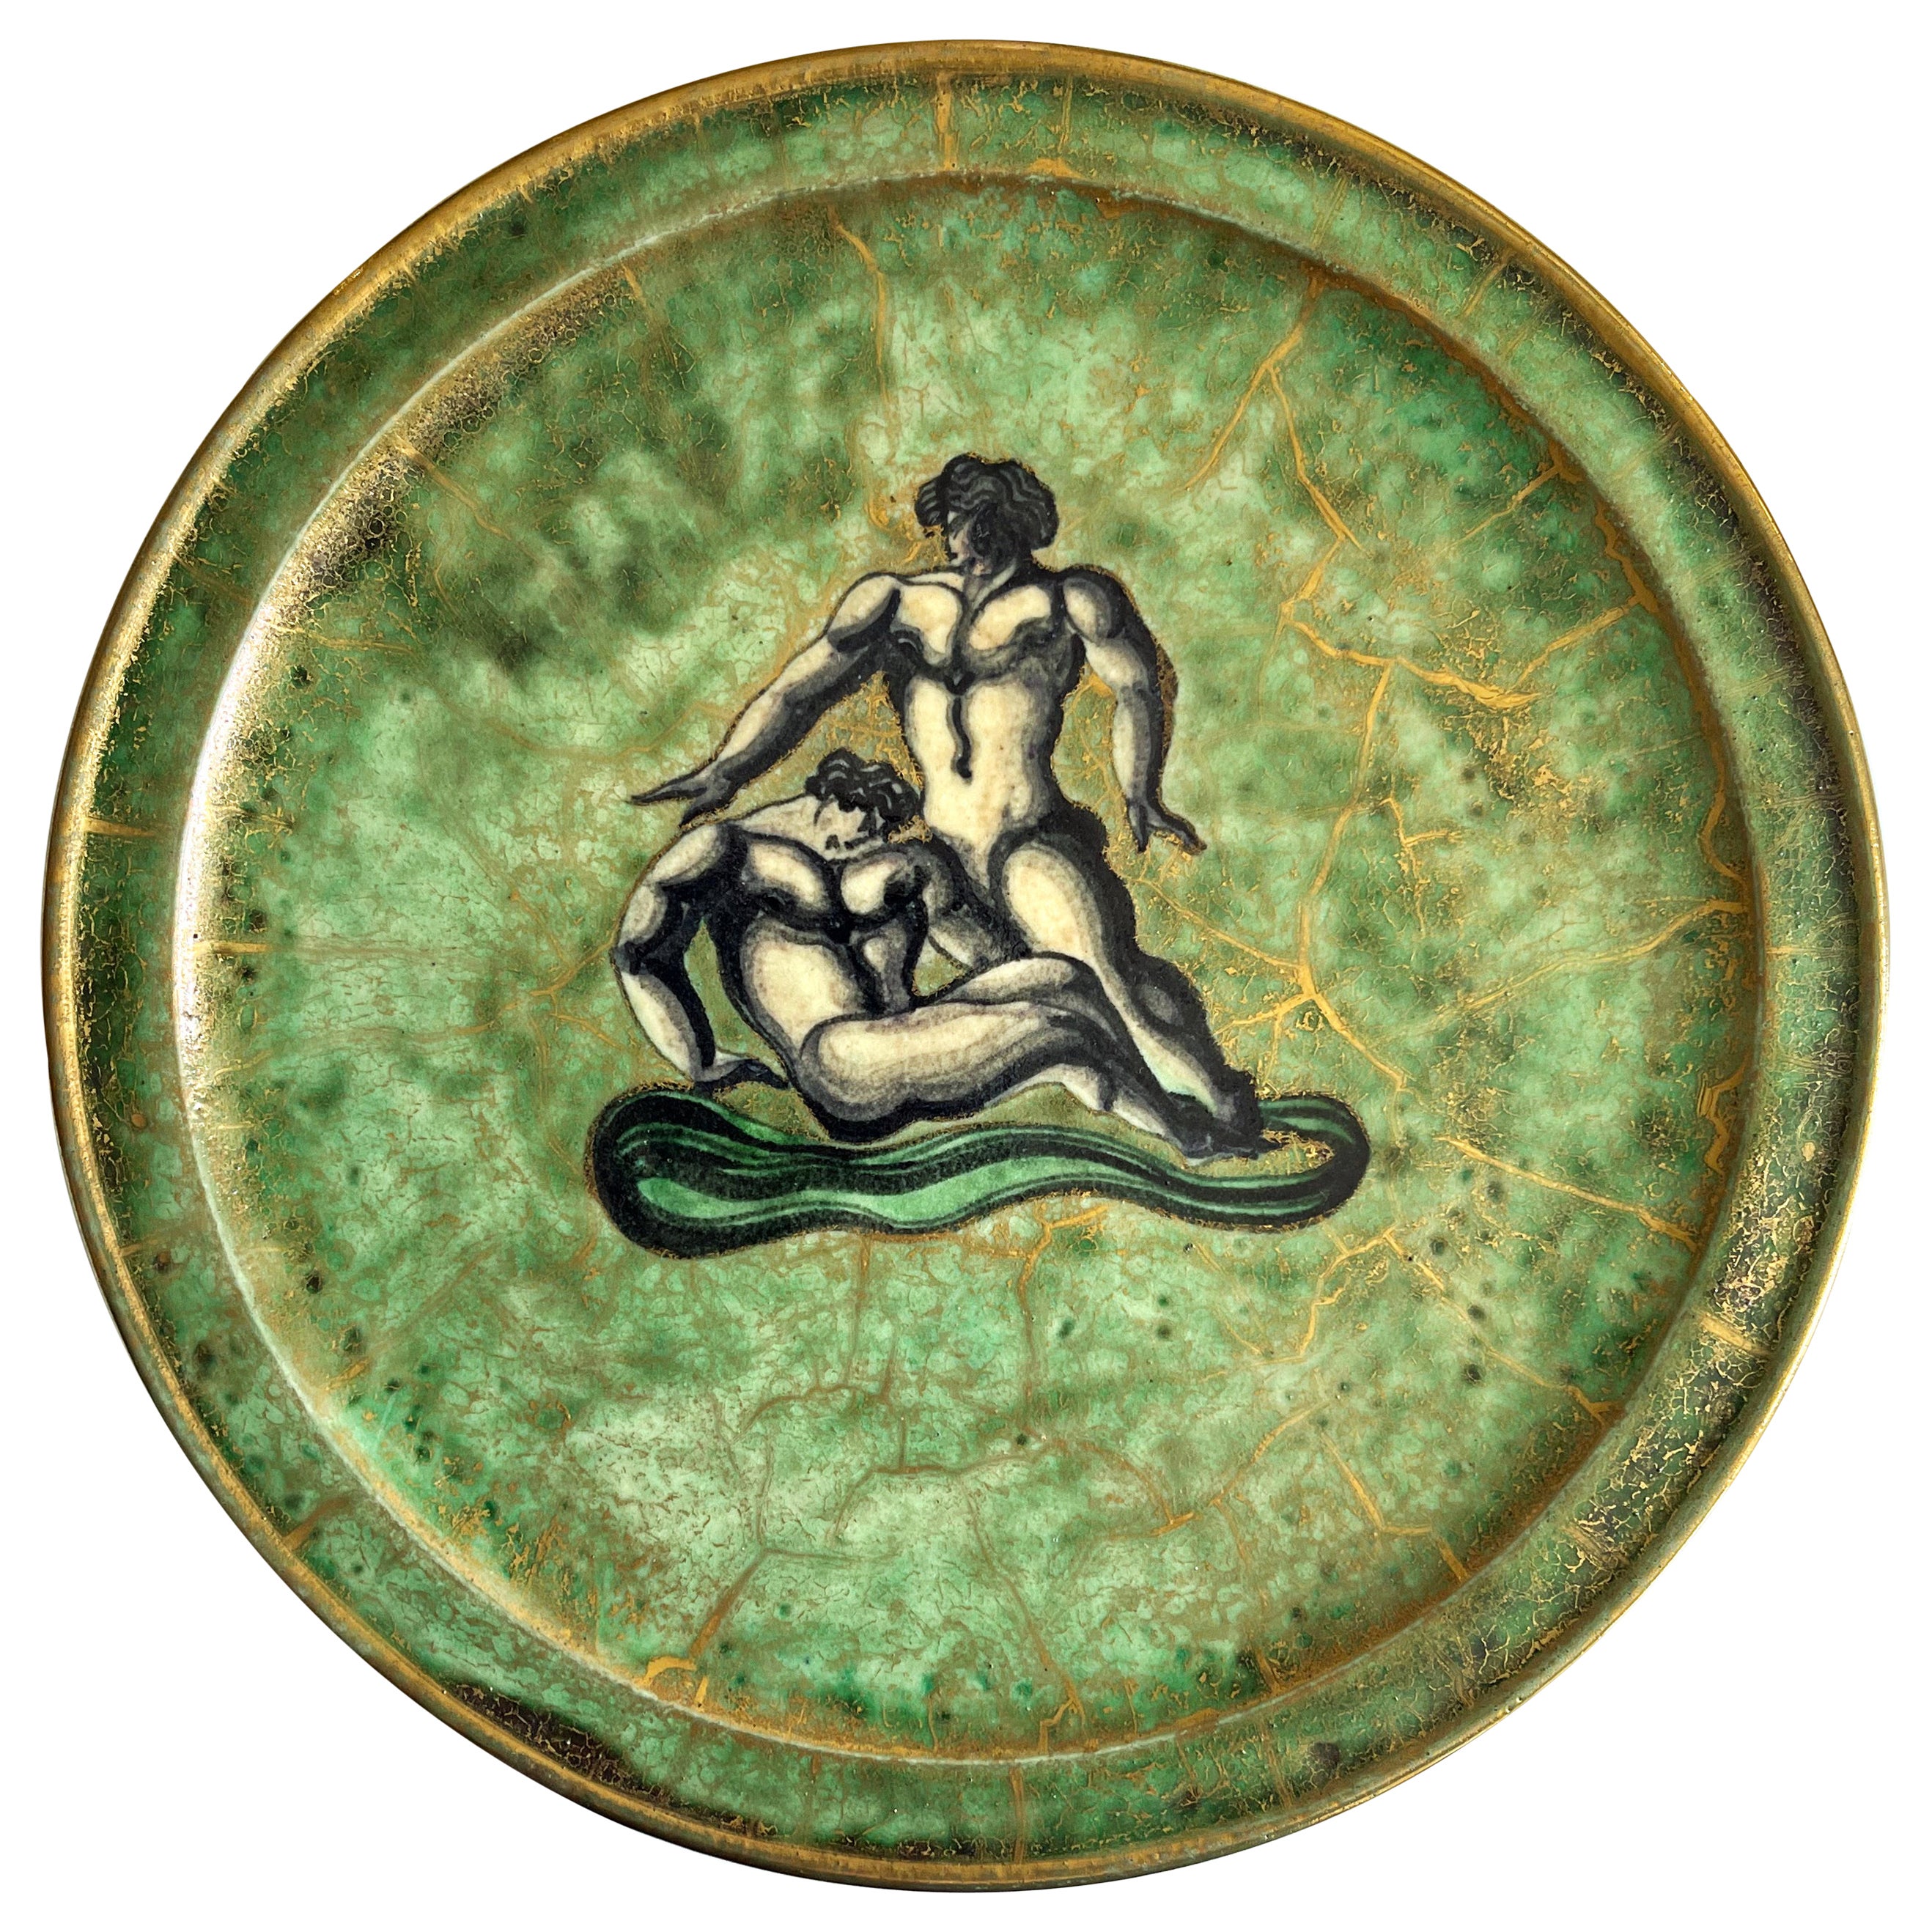 "Two Tritons," Art Deco Plate w/ Mythological Figures in Green and Gold, Mayodon